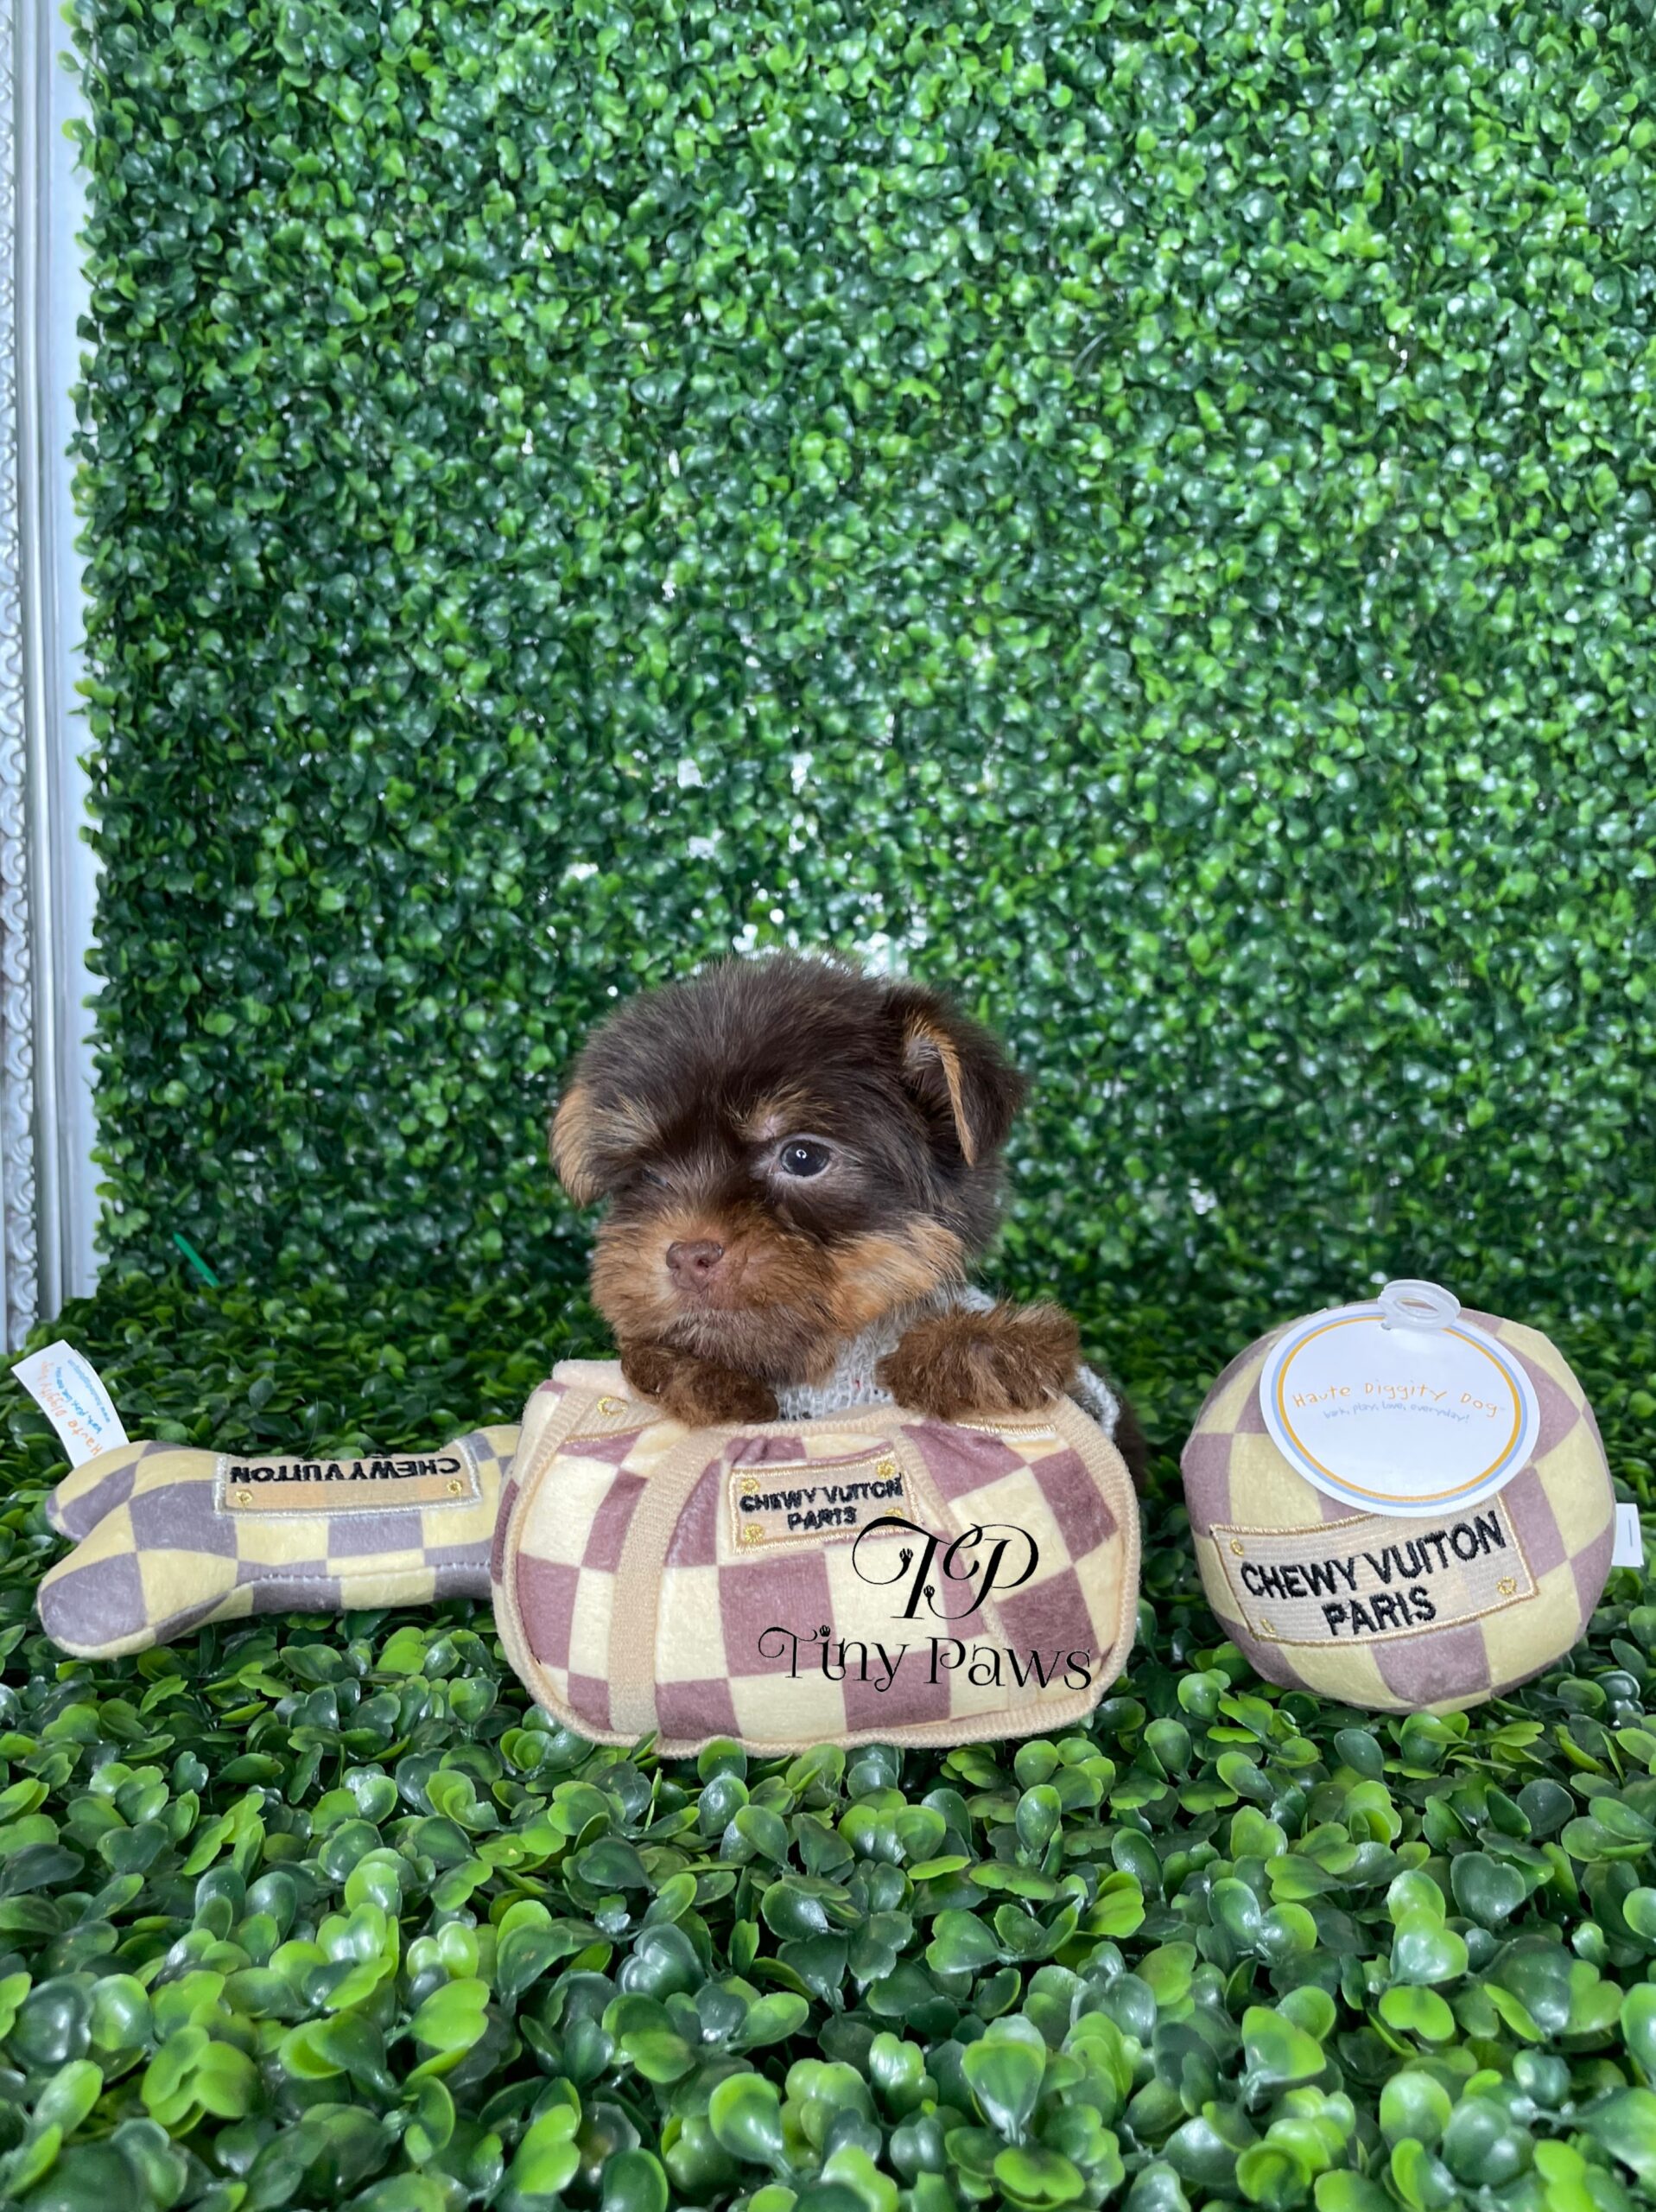 Tiny Teacup Chocolate Yorkie Puppy For Sale